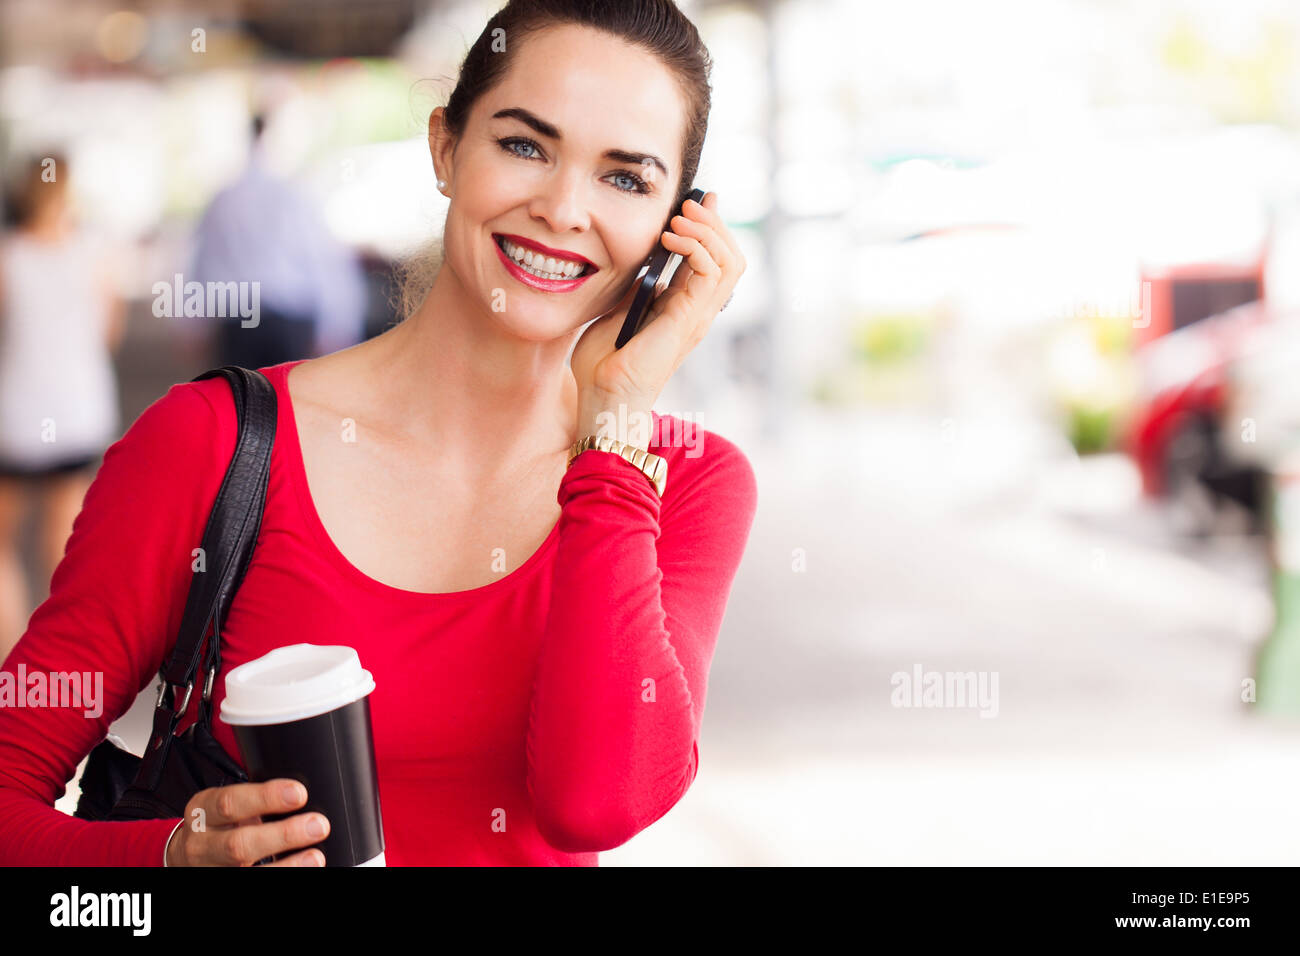 A beautiful woman out shopping holding a cup of coffee and talking on the phone. Stock Photo